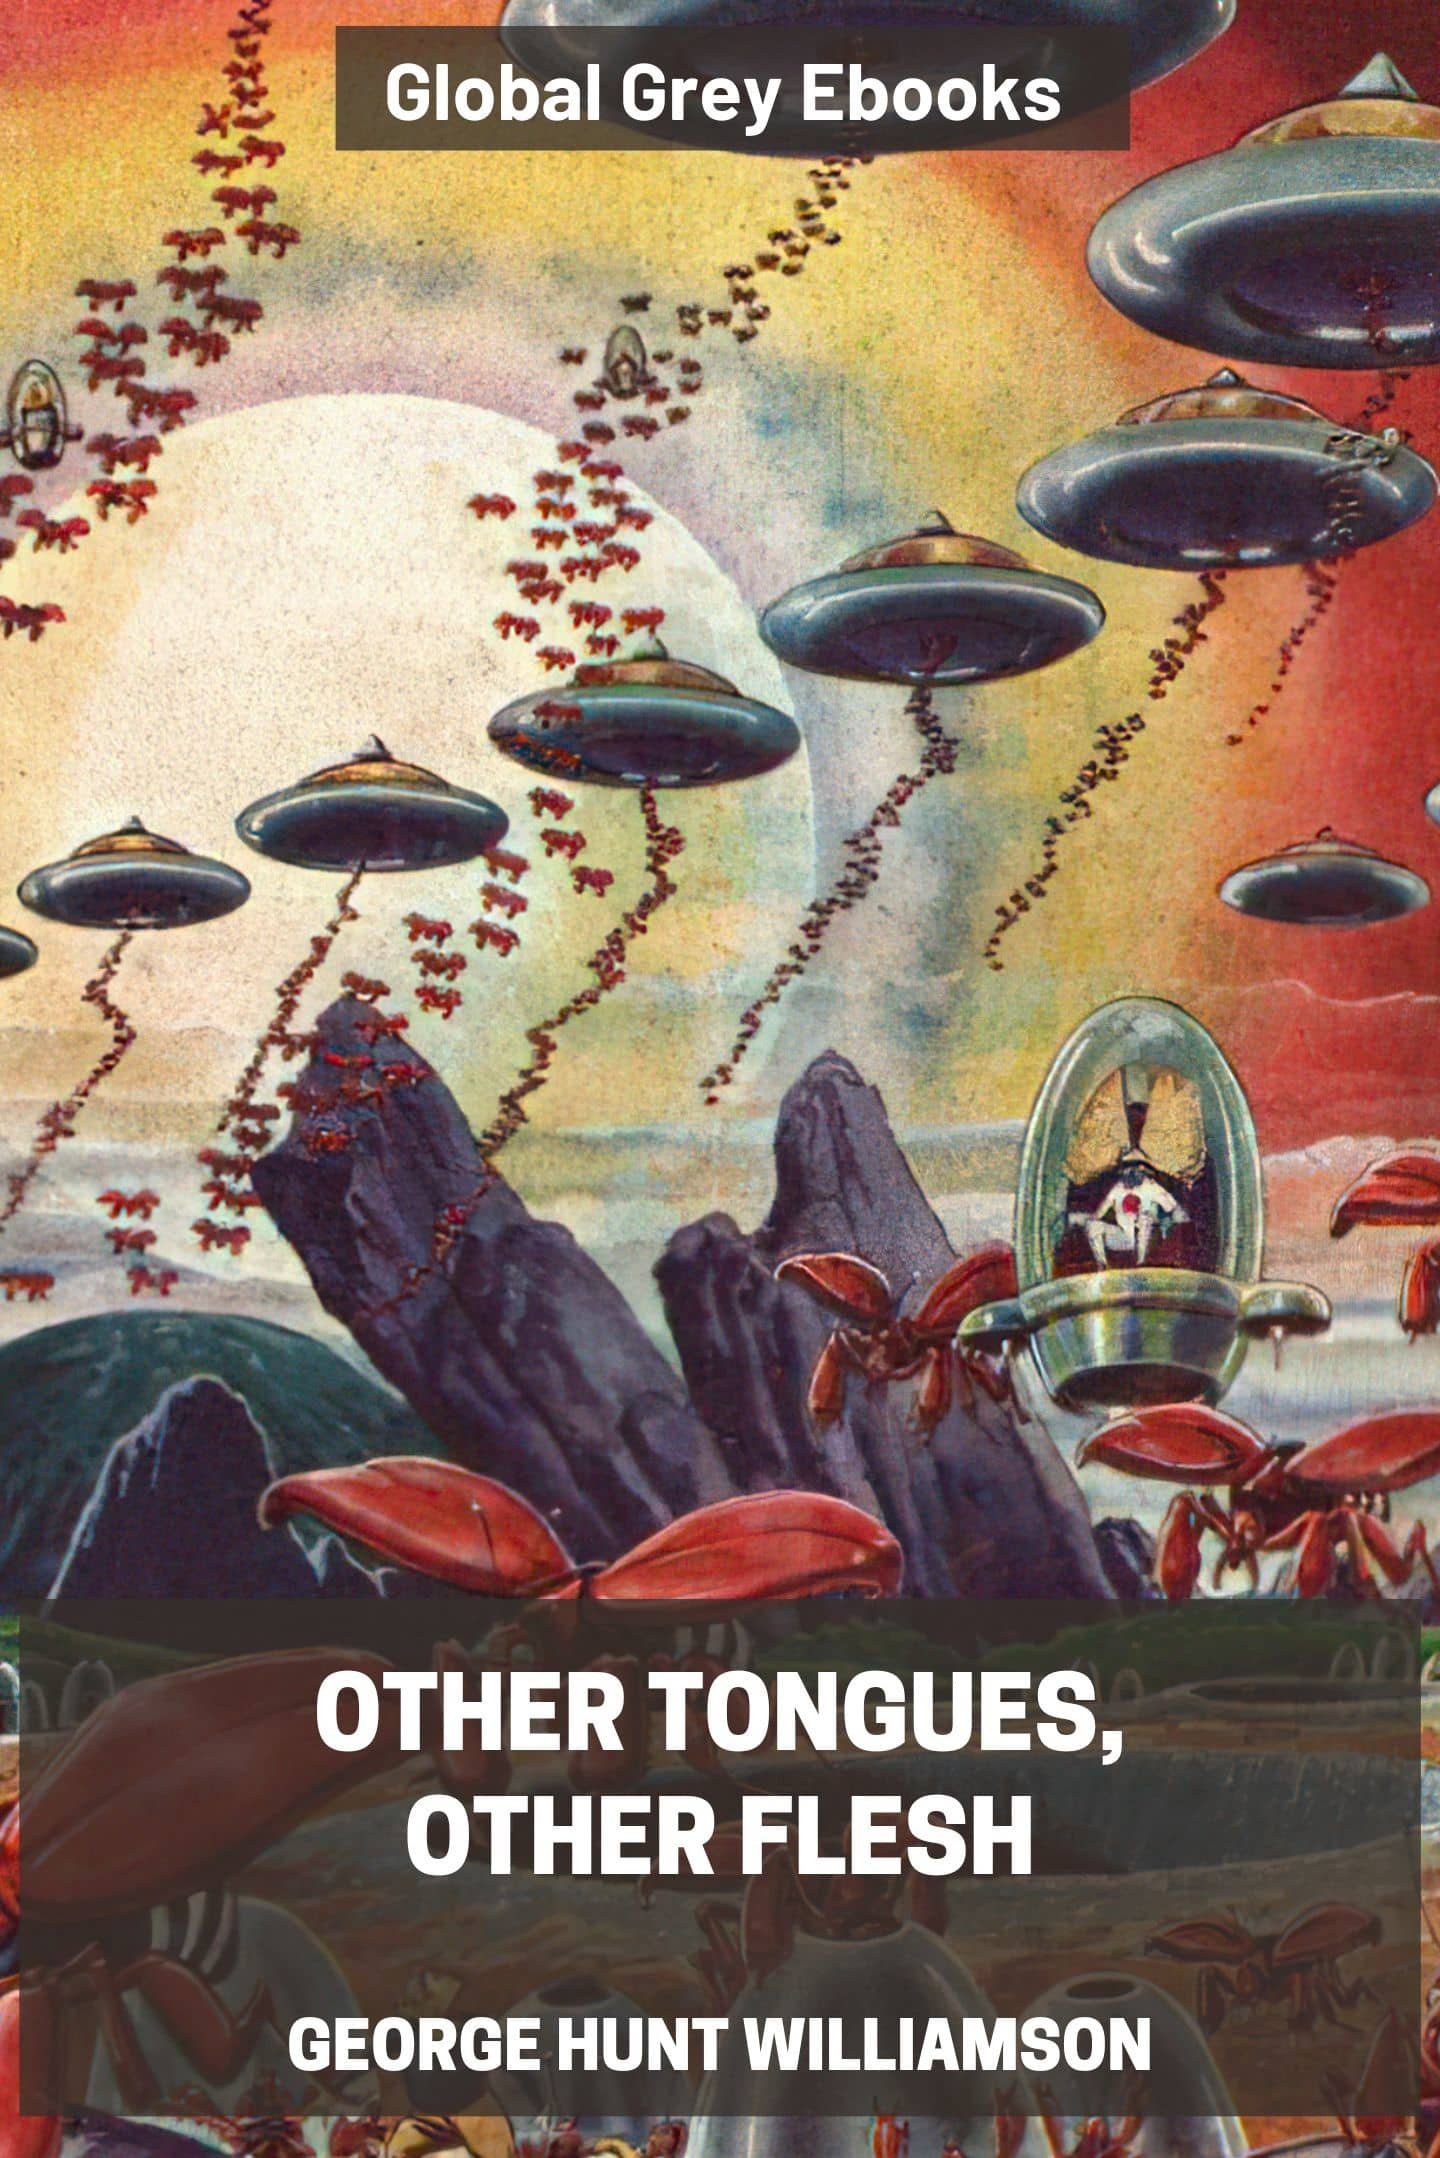 Other Tongues, Other Flesh by George Hunt Williamson Complete text online  Global Grey ebooks